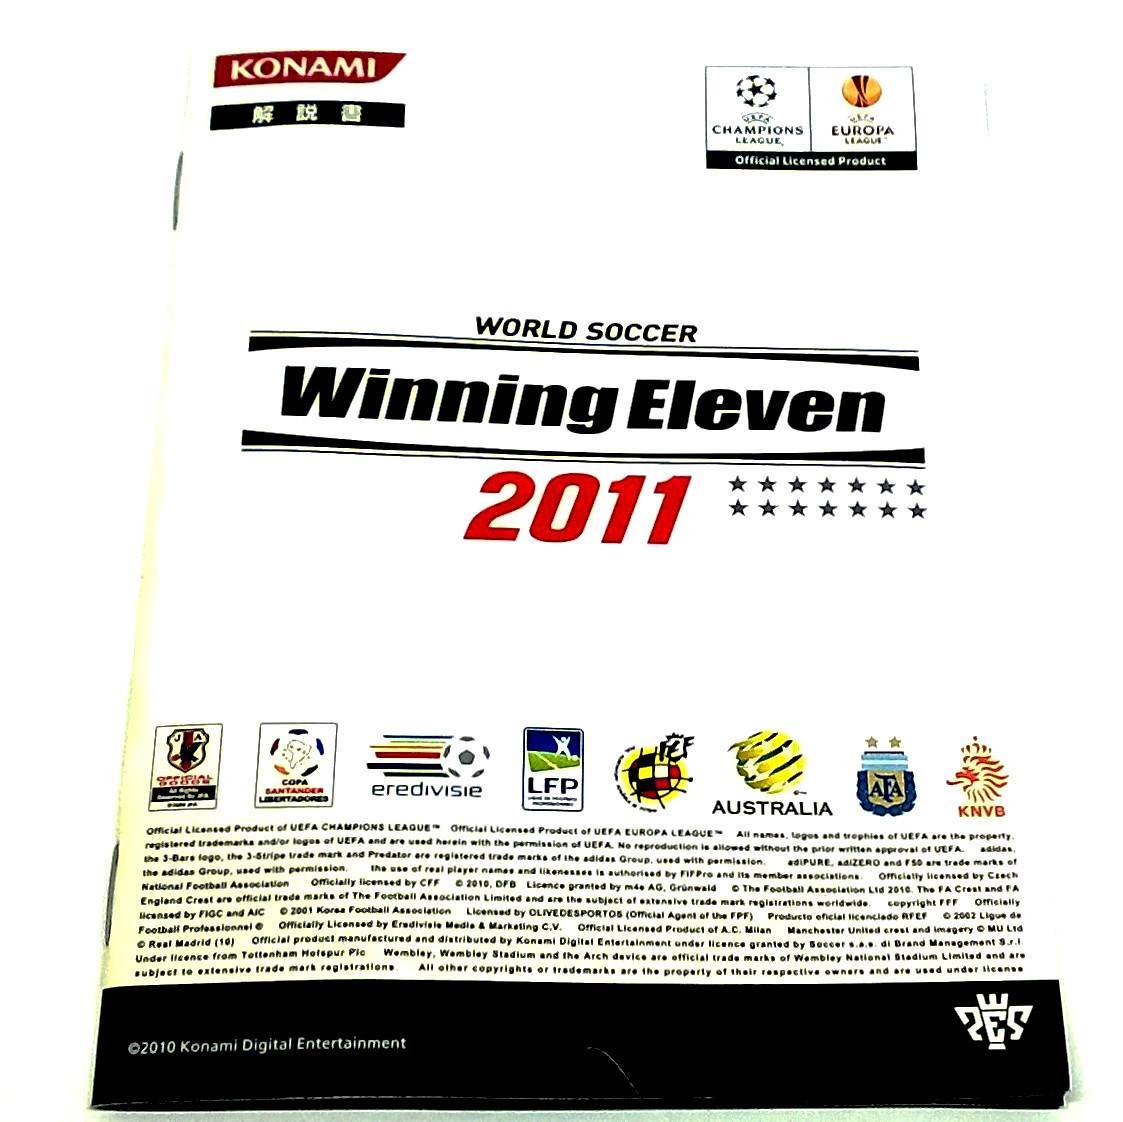 World Soccer Winning Eleven 2011 for PlayStation 3 (import) - Front of manual